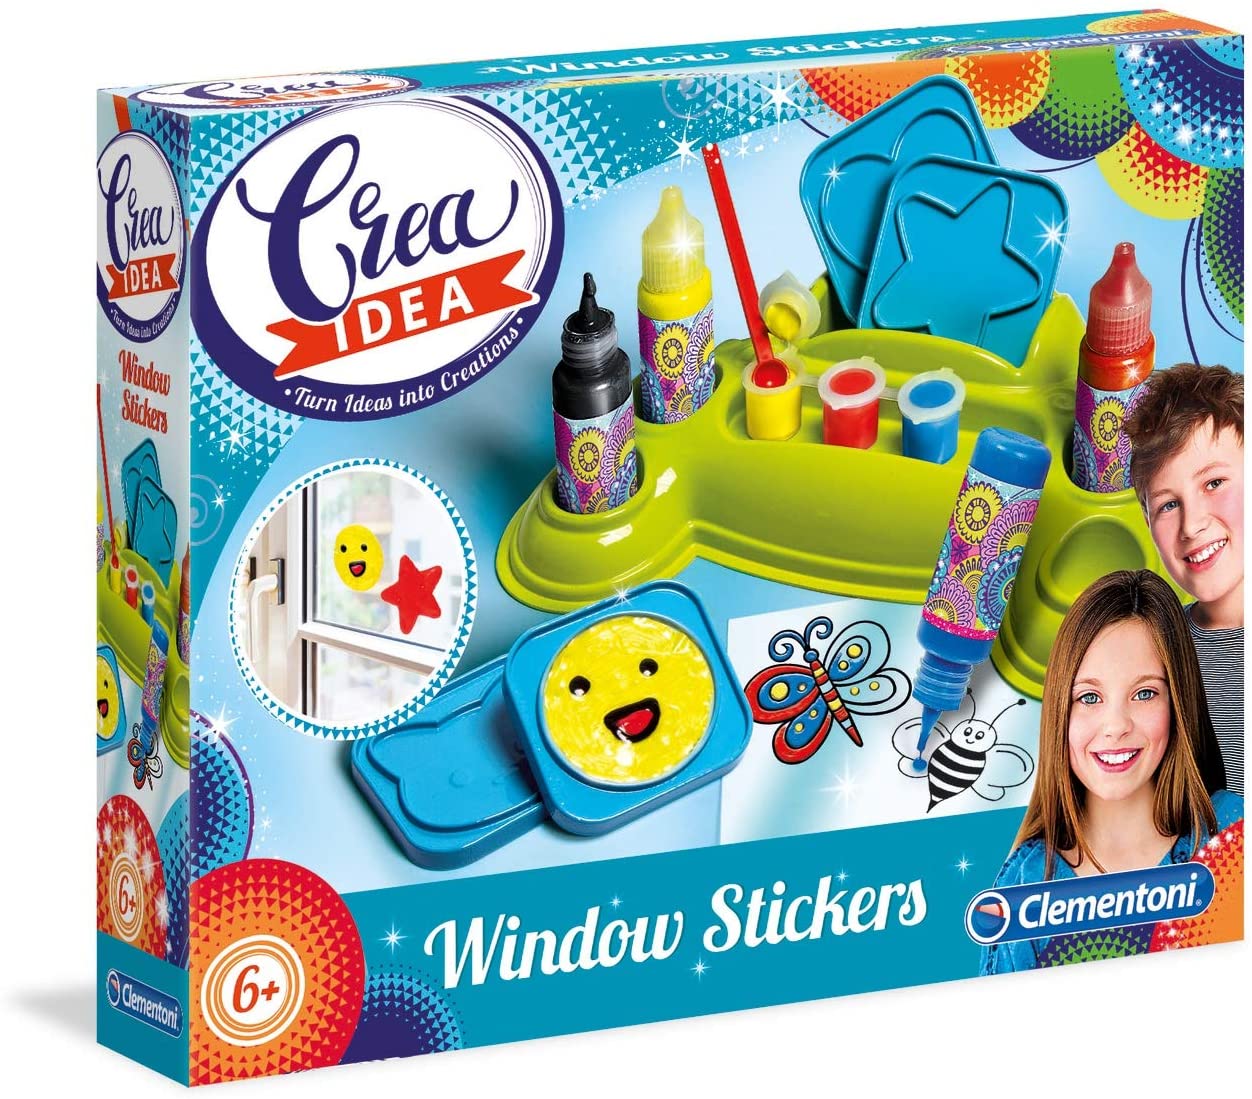 Clementoni 18536 Crea Idea Window Picture Craft Kit for Children 6 Years an